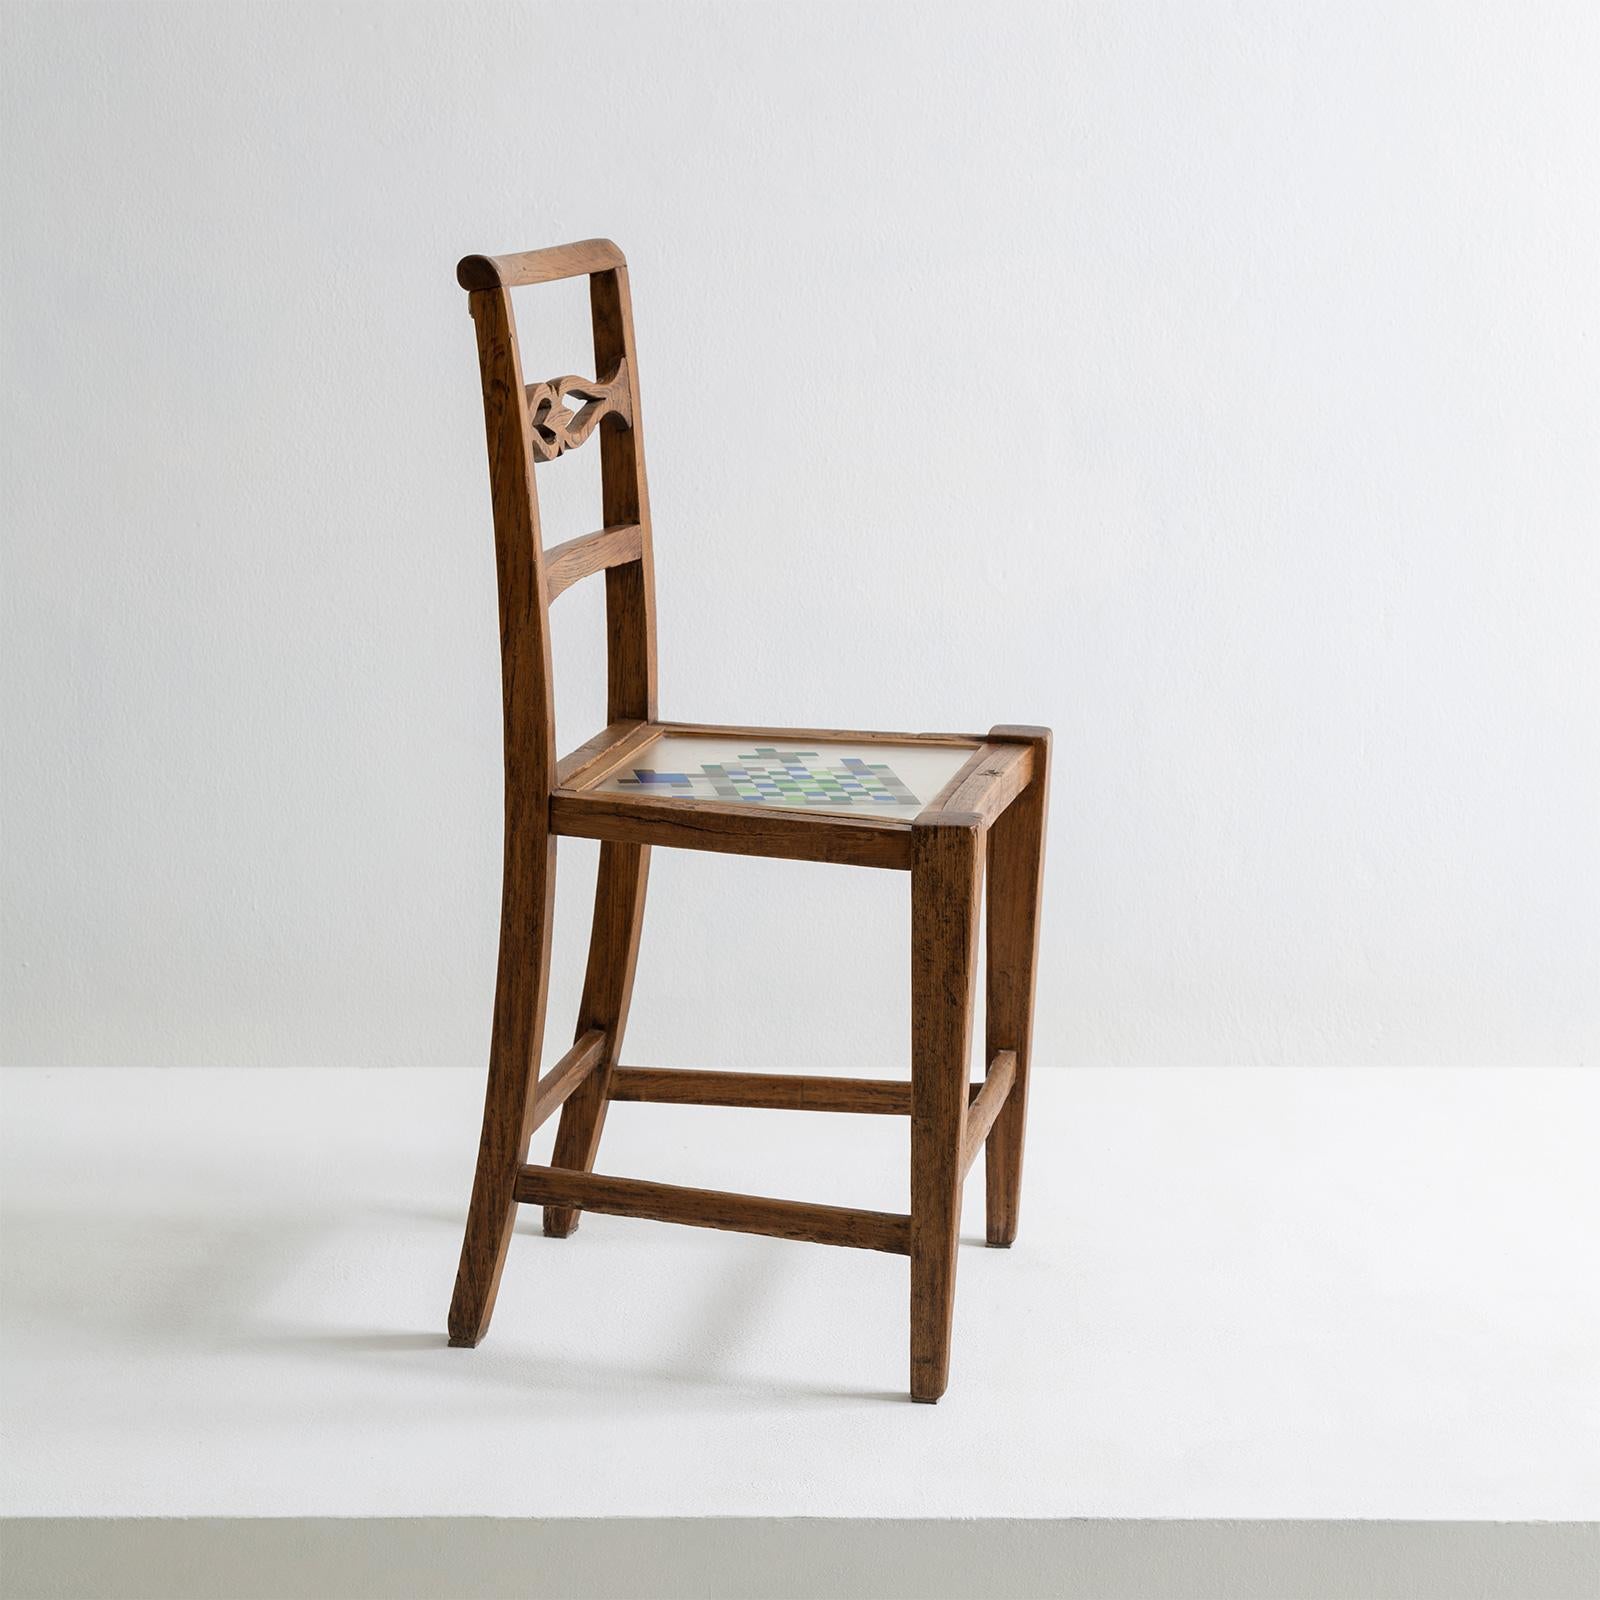 The Mosaiced chair is part of the mosaiced furniture collection that finds its inspiration in the element ‘water’. It’s made of restored chair from 1790, which belong to the style of Louis XVI. The chair is lightened through the sitting made of a